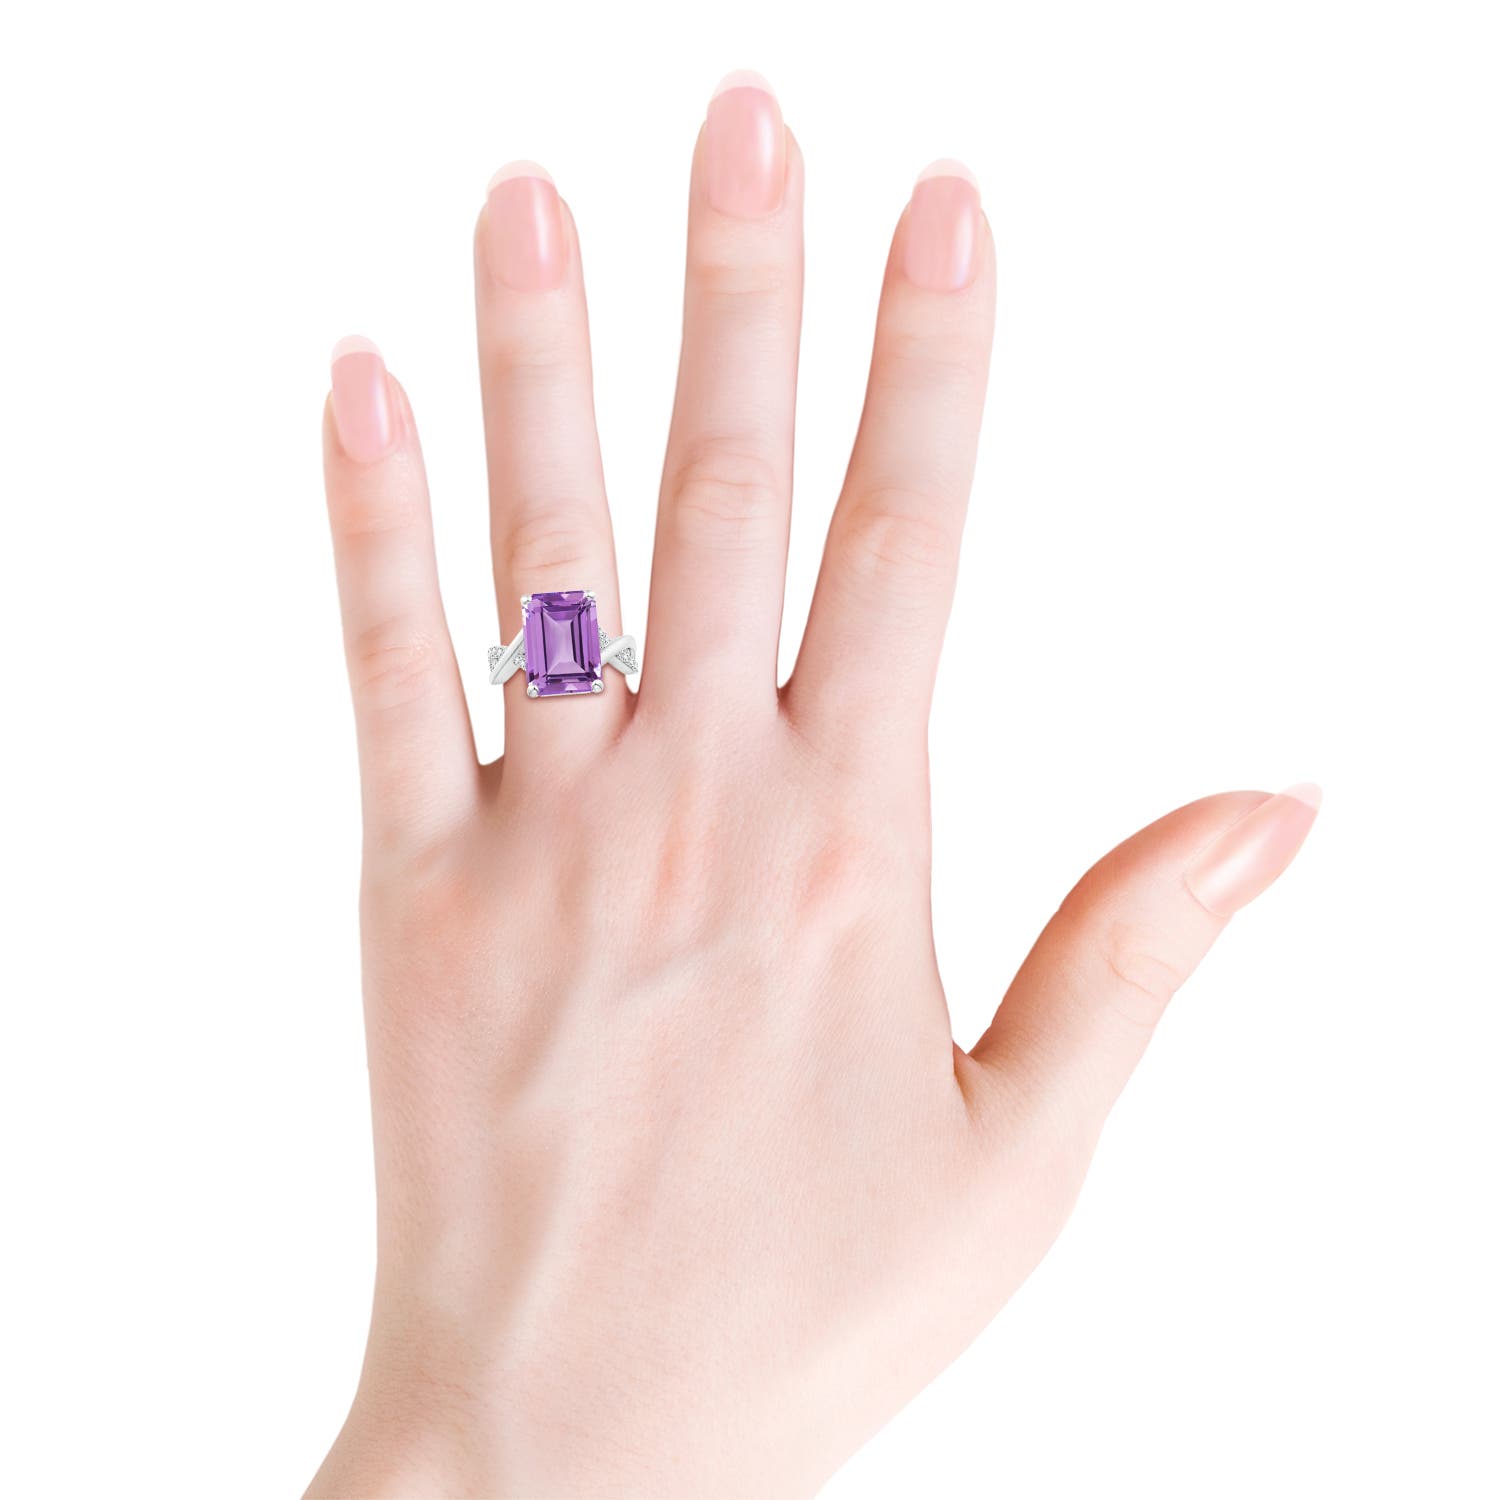 A - Amethyst / 6.7 CT / 14 KT White Gold